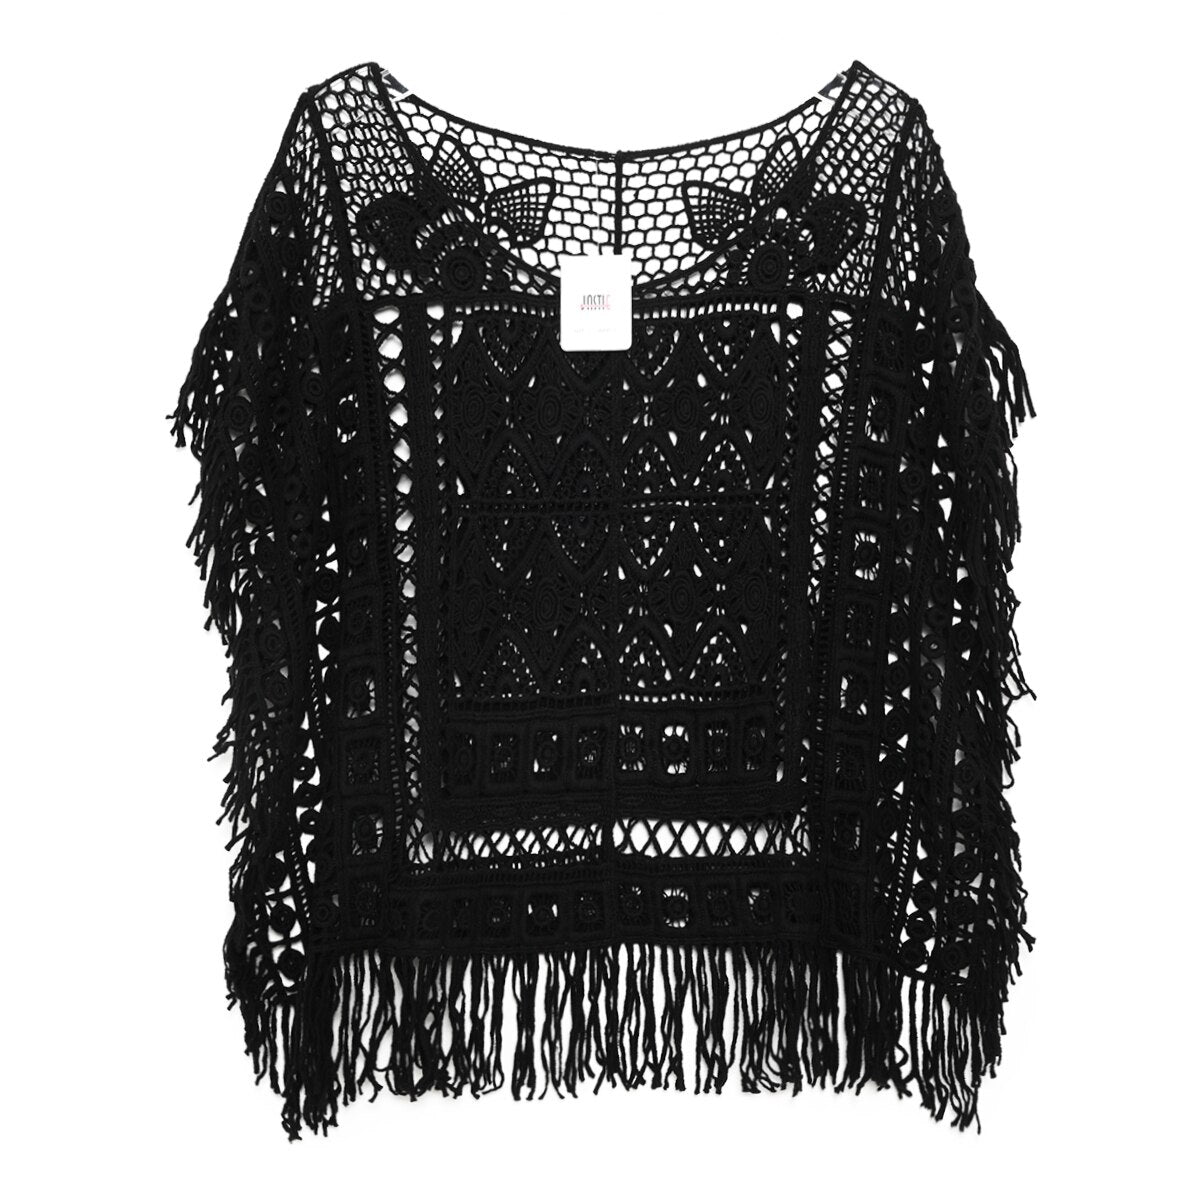 Boho Crochet Chic Lace Top Tassel Batwing Sleeve Loose Casual Beach Blouse Shirt Hollow out Floral Embroidery Women Shirt